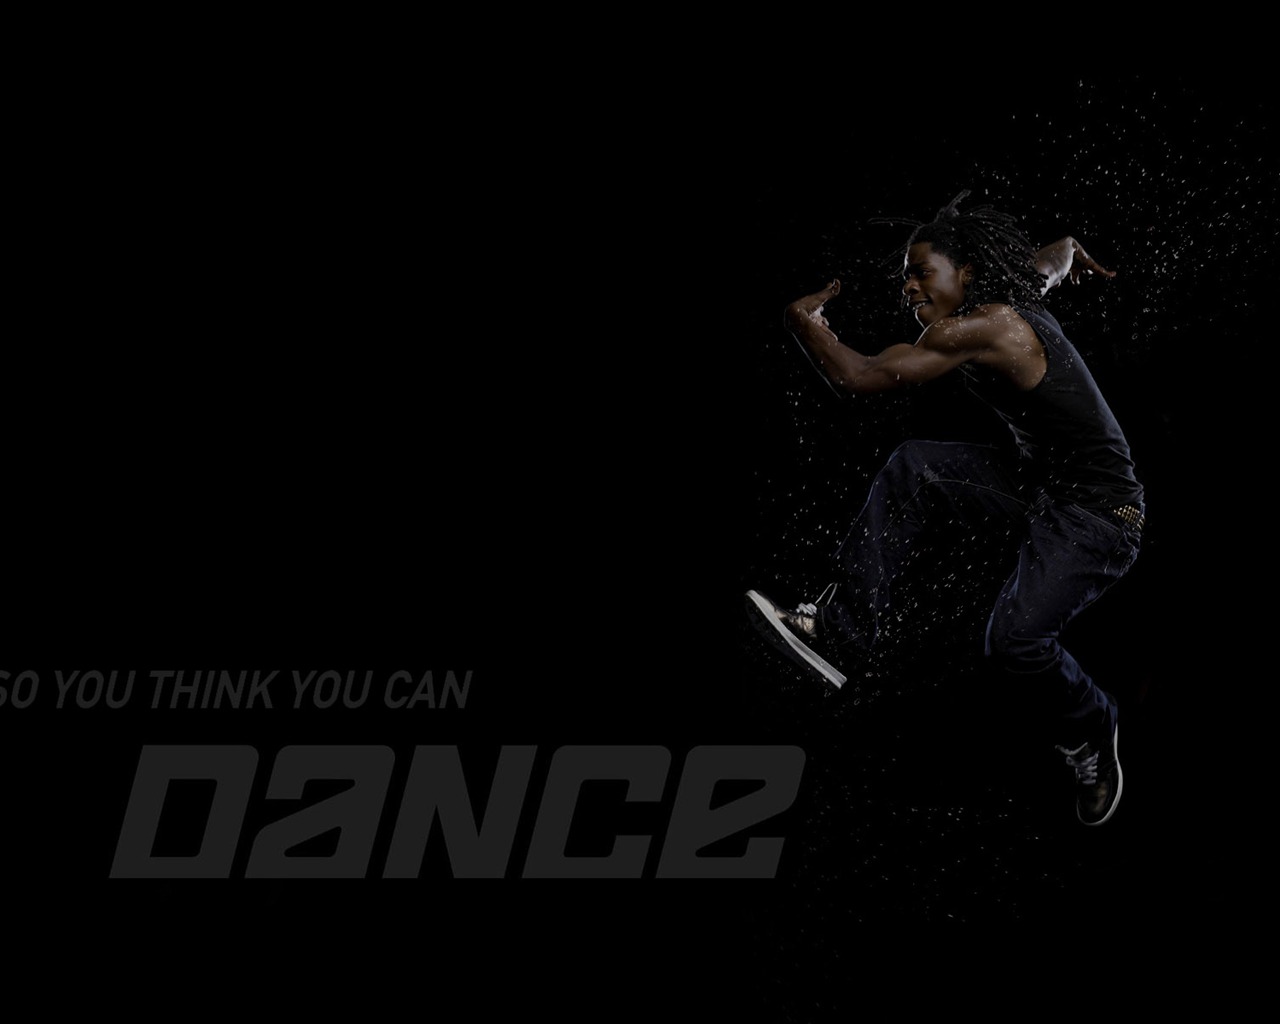 So You Think You Can Dance 舞林争霸 壁纸(二)16 - 1280x1024